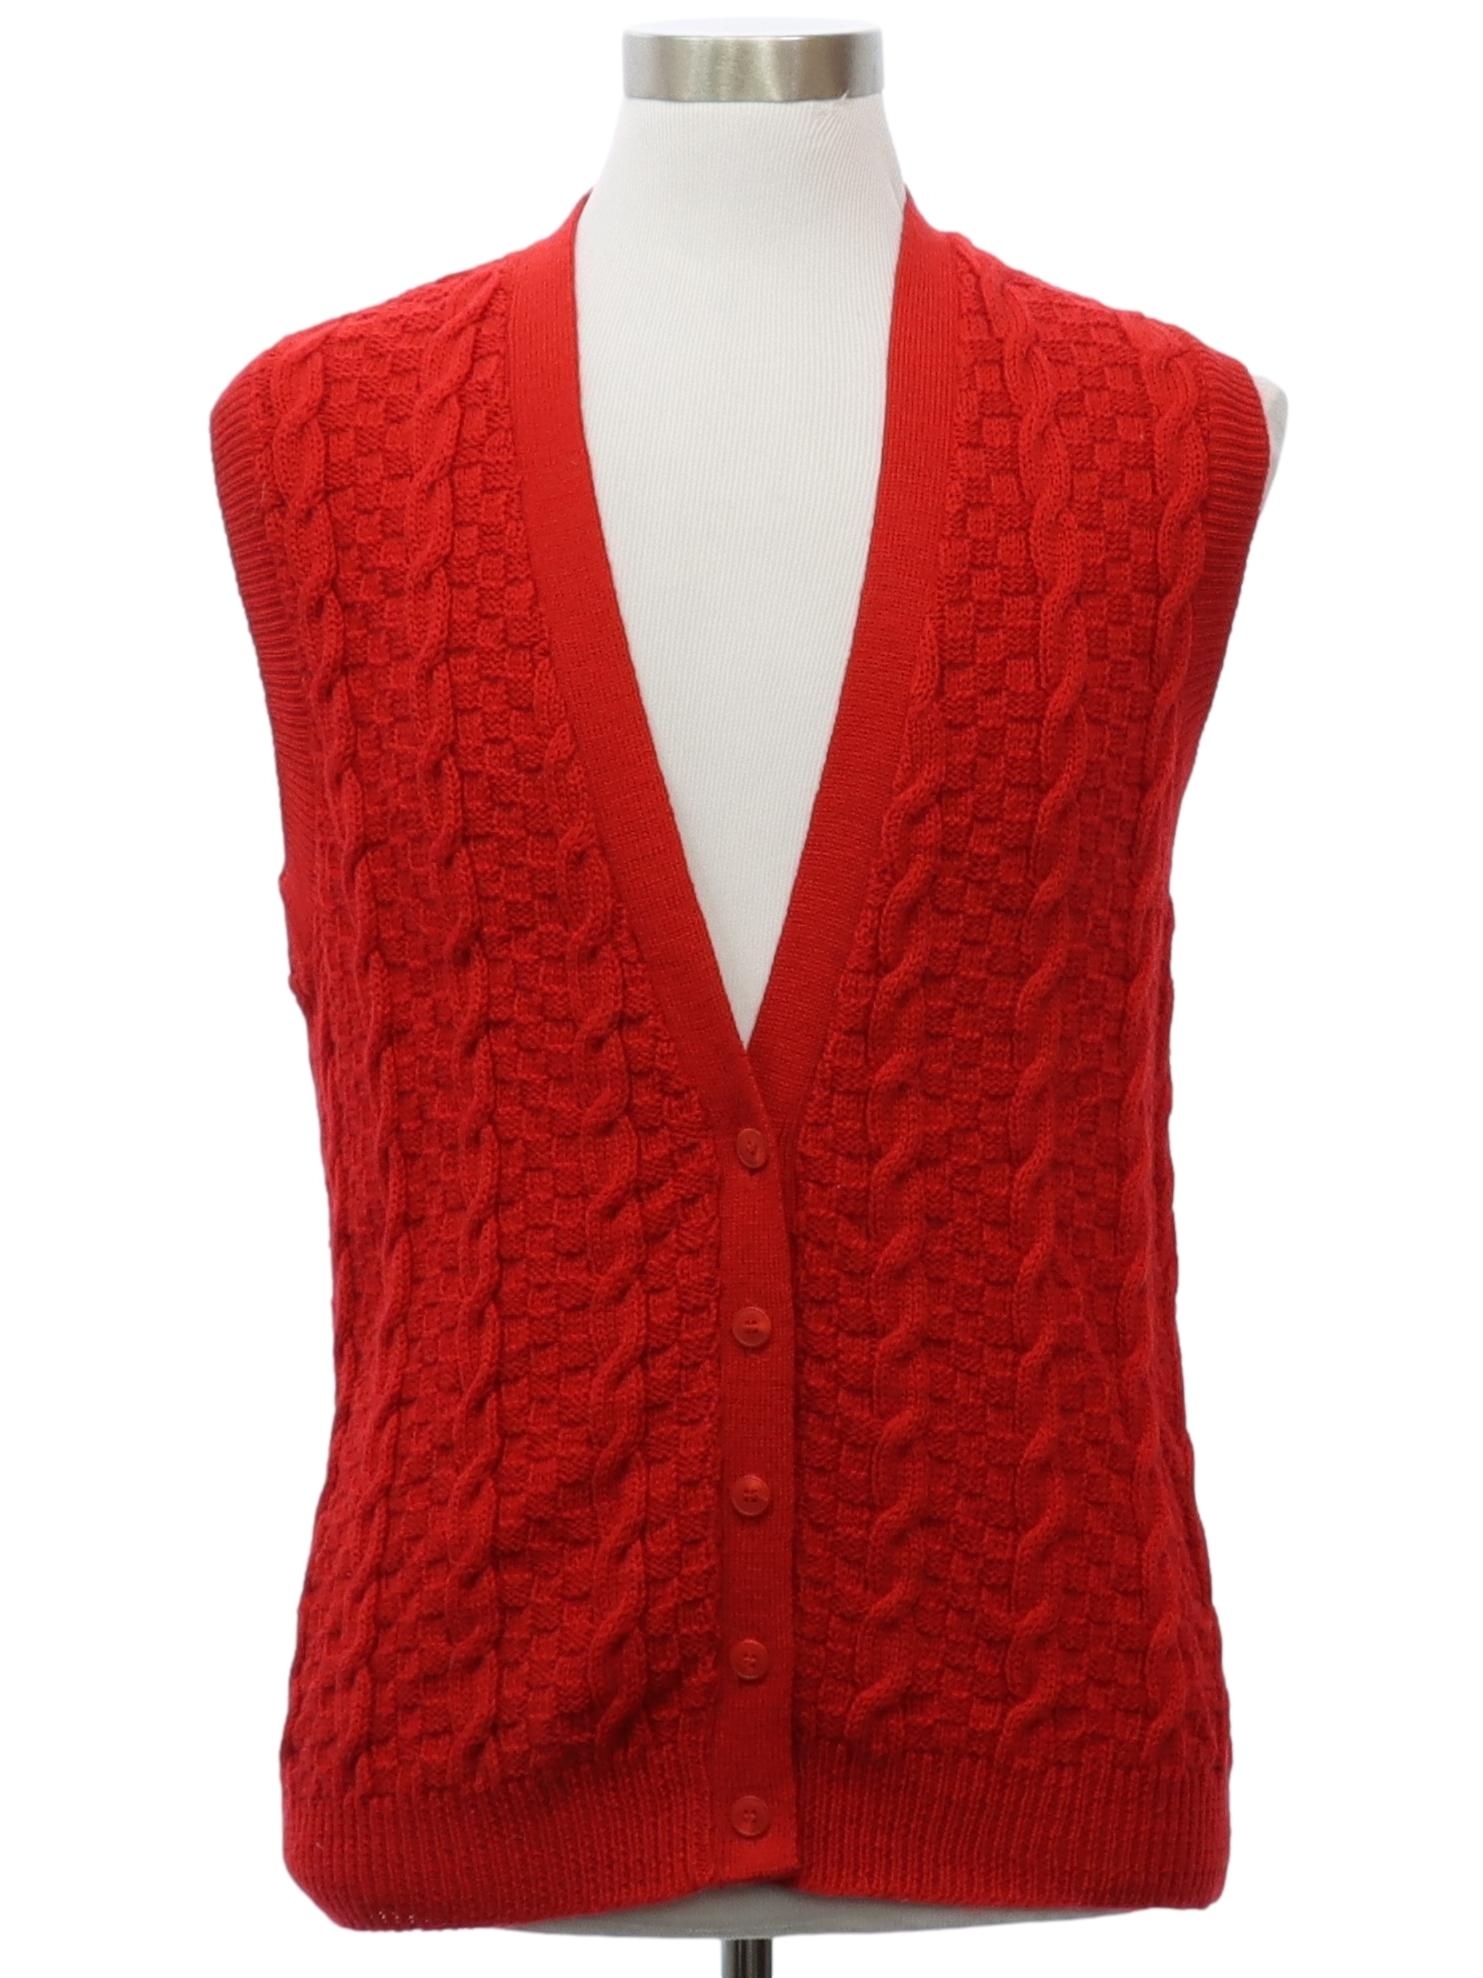 voorzichtig ondersteboven Denk vooruit Vintage 1990's Sweater: 90s or Newer -Pendleton- Mens hunter red wool  sleeveless vest having ribbed knit finishing the armholes and a flat knit  purl front button band with five buttons fastening it.